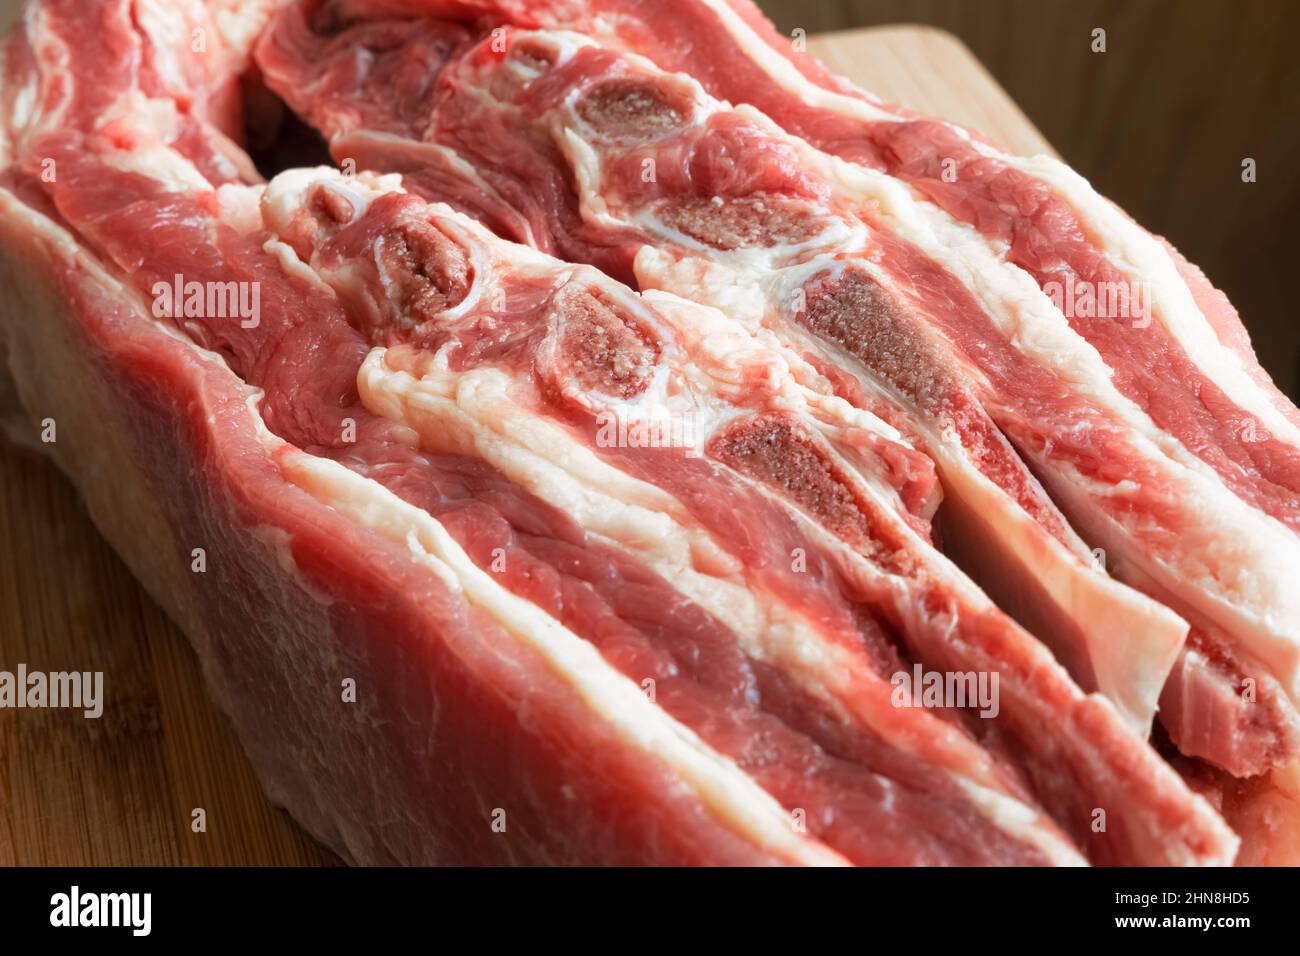 Large pieces of butchered beef with bones on the table close-up Stock Photo